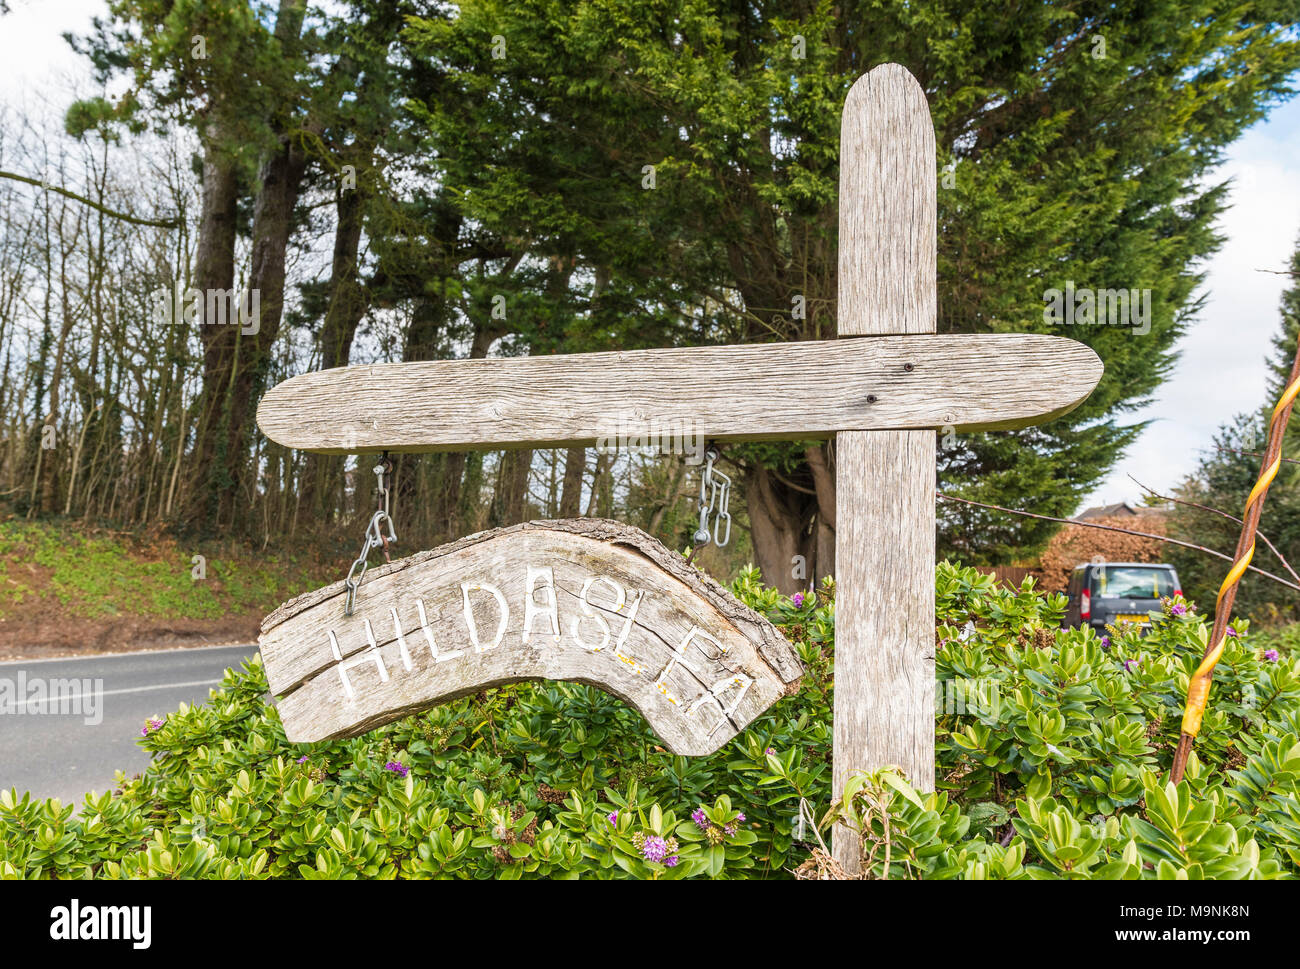 Rustic wooden signpost with house name outside a house in England, UK. Stock Photo